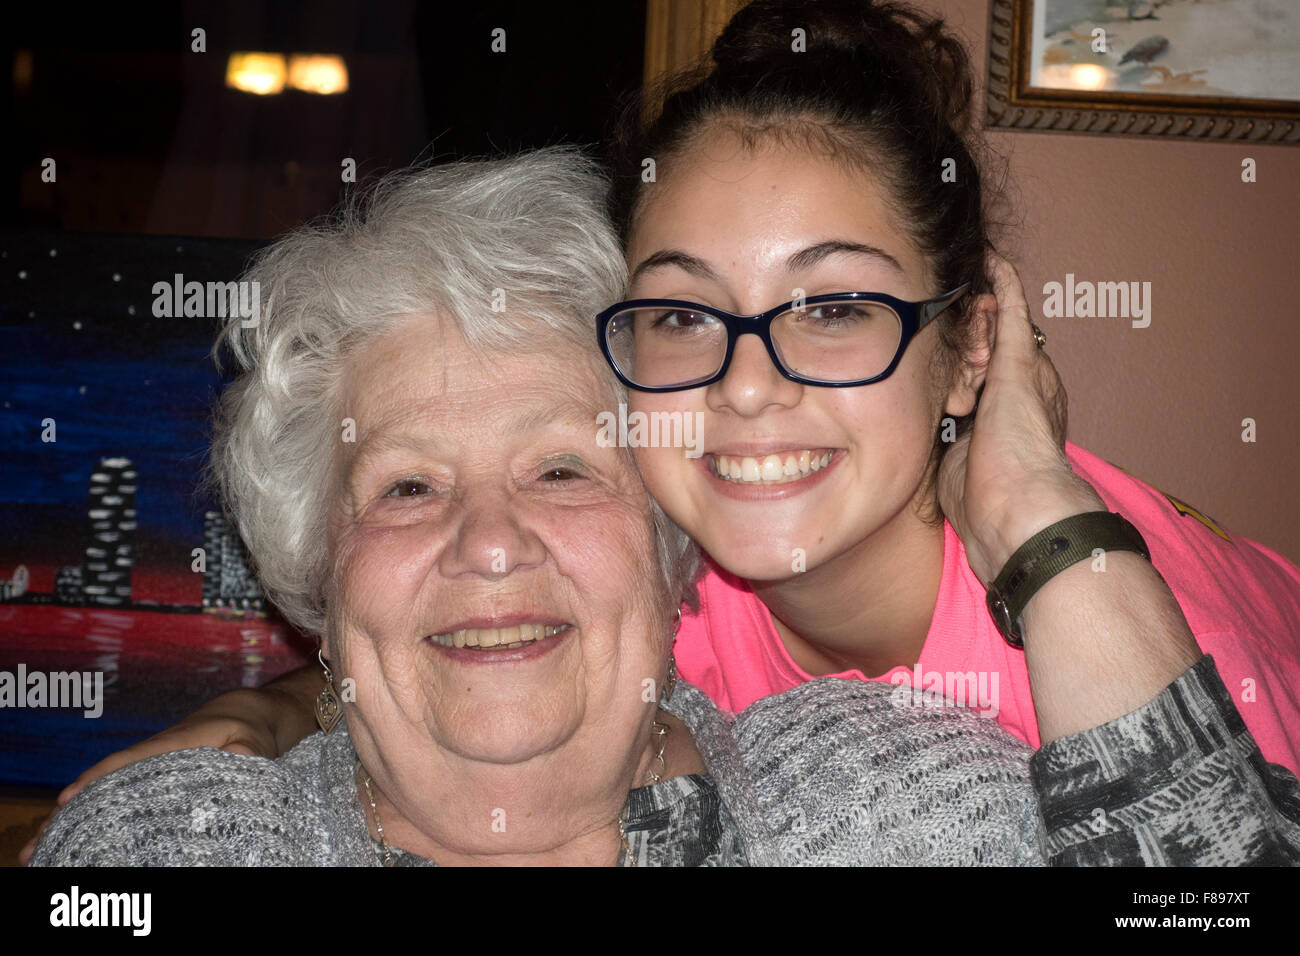 Adoring grandmother and granddaughter age 79 and 15 having a happy moment together. Downers Grove Illinois IL USA Stock Photo